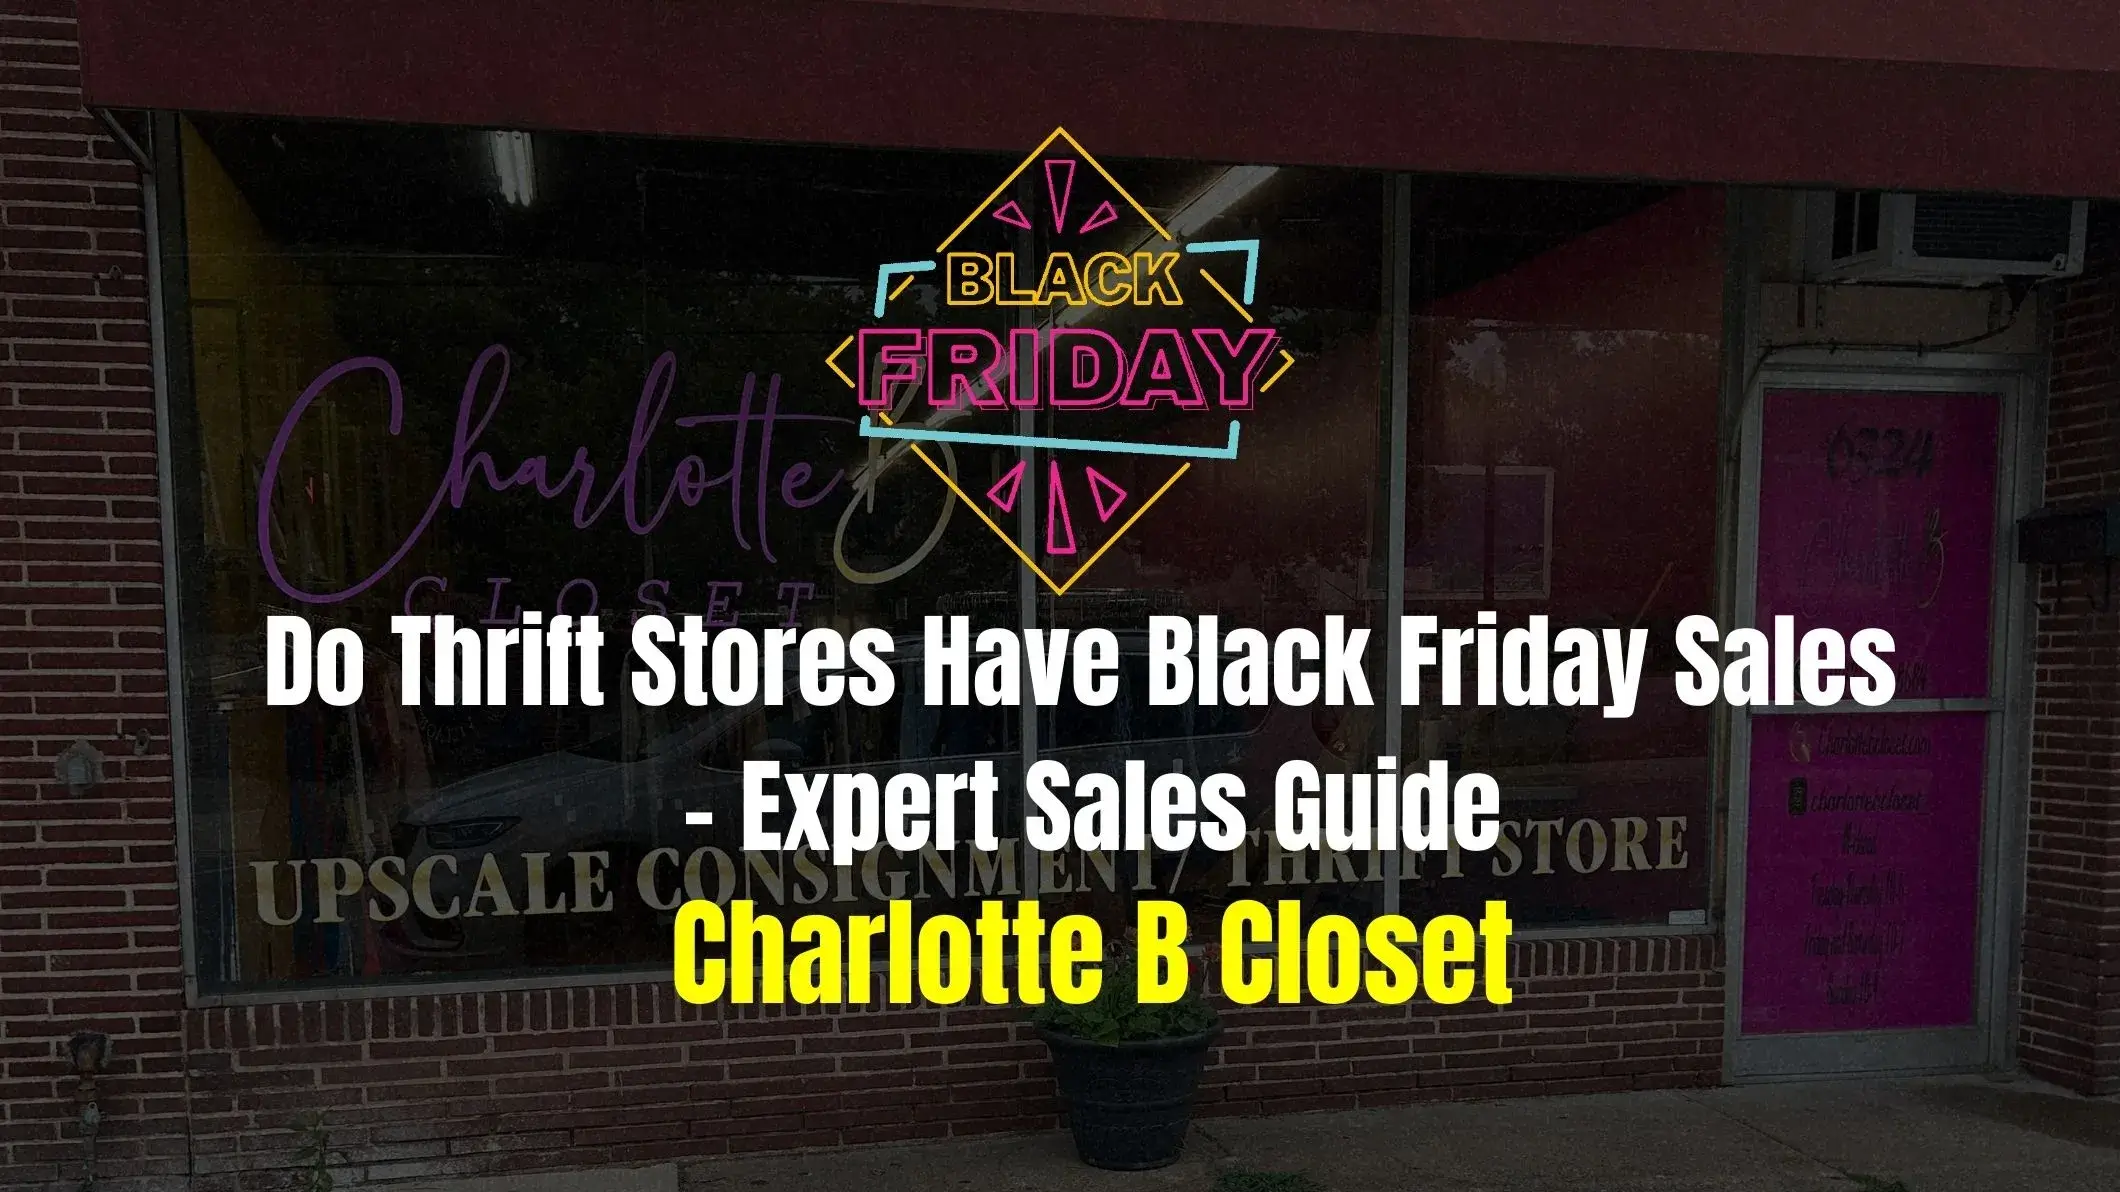 Do Thrift Stores Have Black Friday Sales - Expert Guide